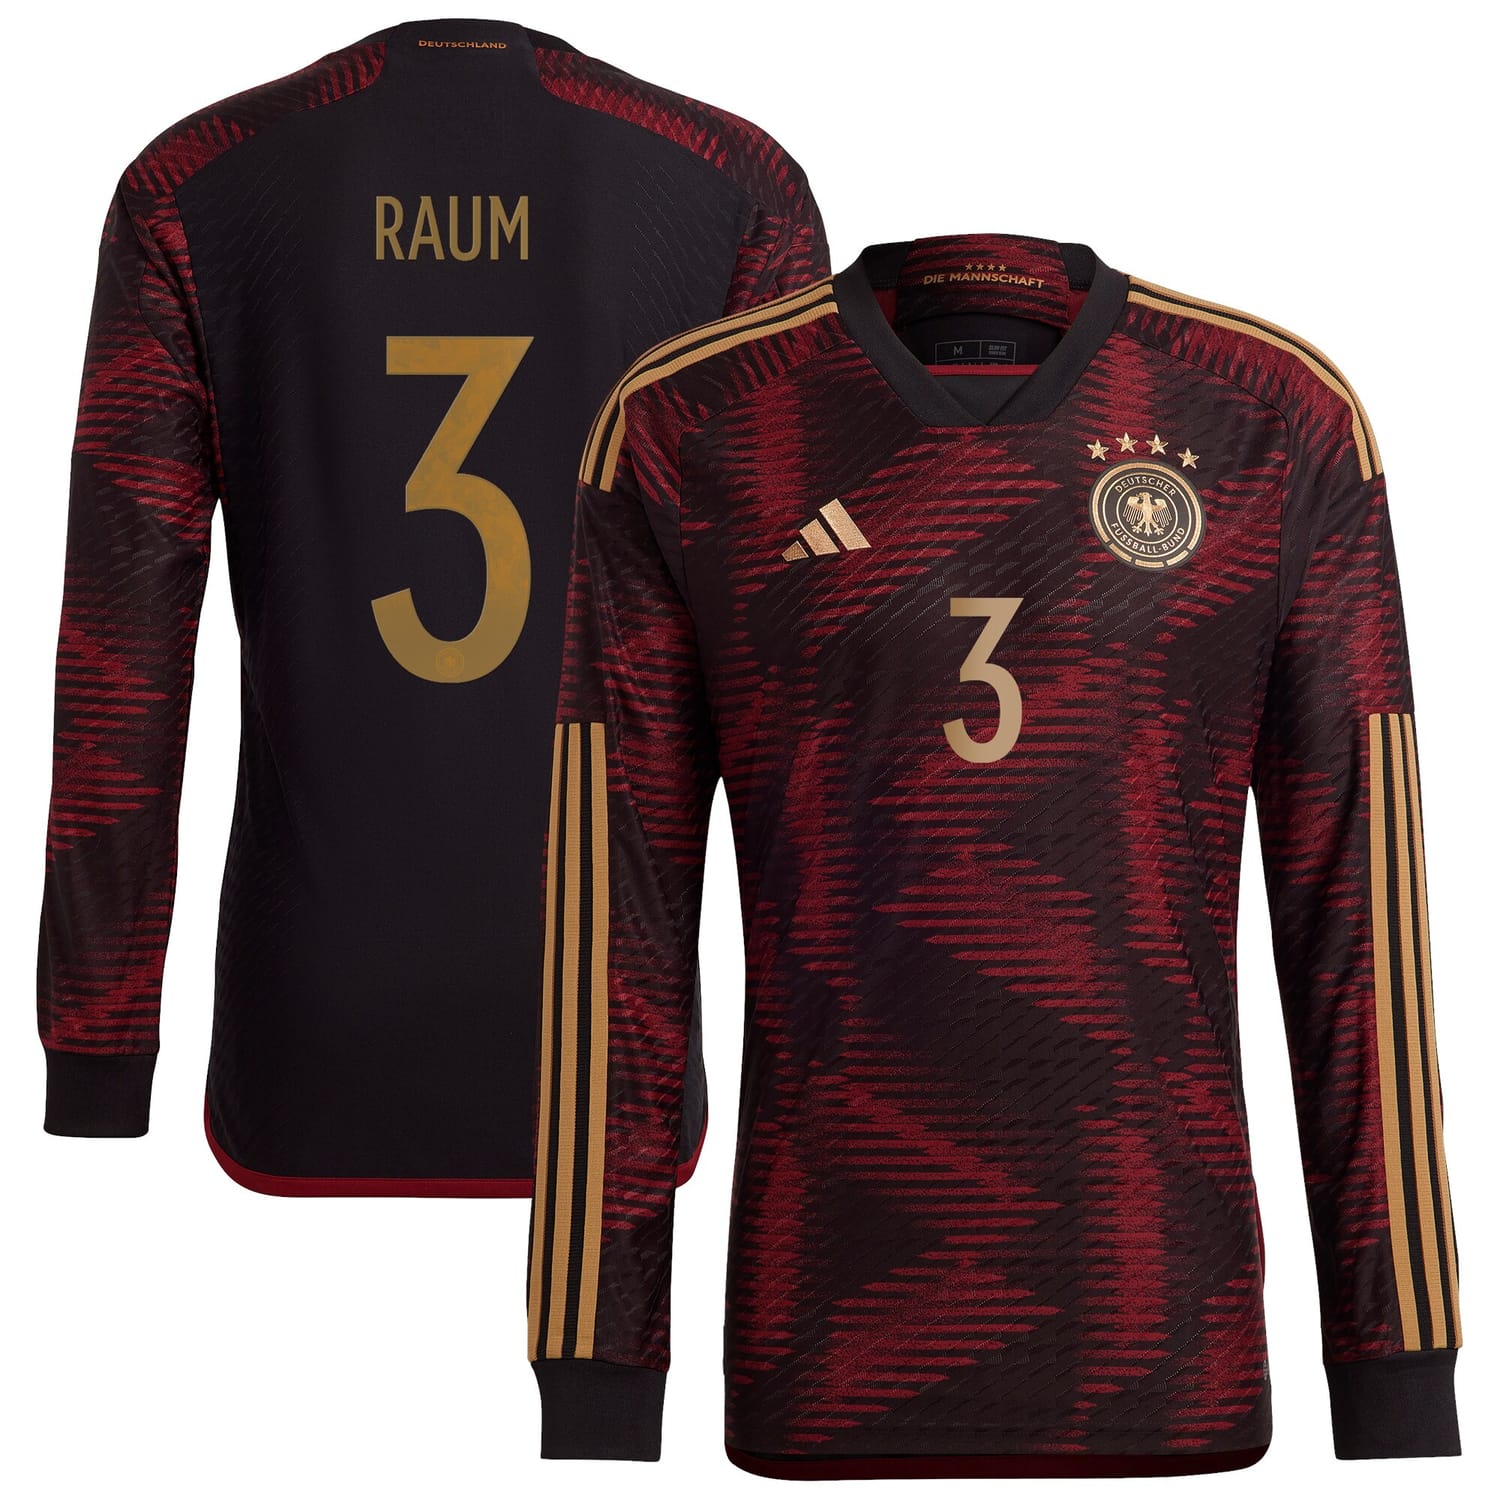 Germany National Team Away Authentic Jersey Shirt Long Sleeve player David Raum 3 printing for Men